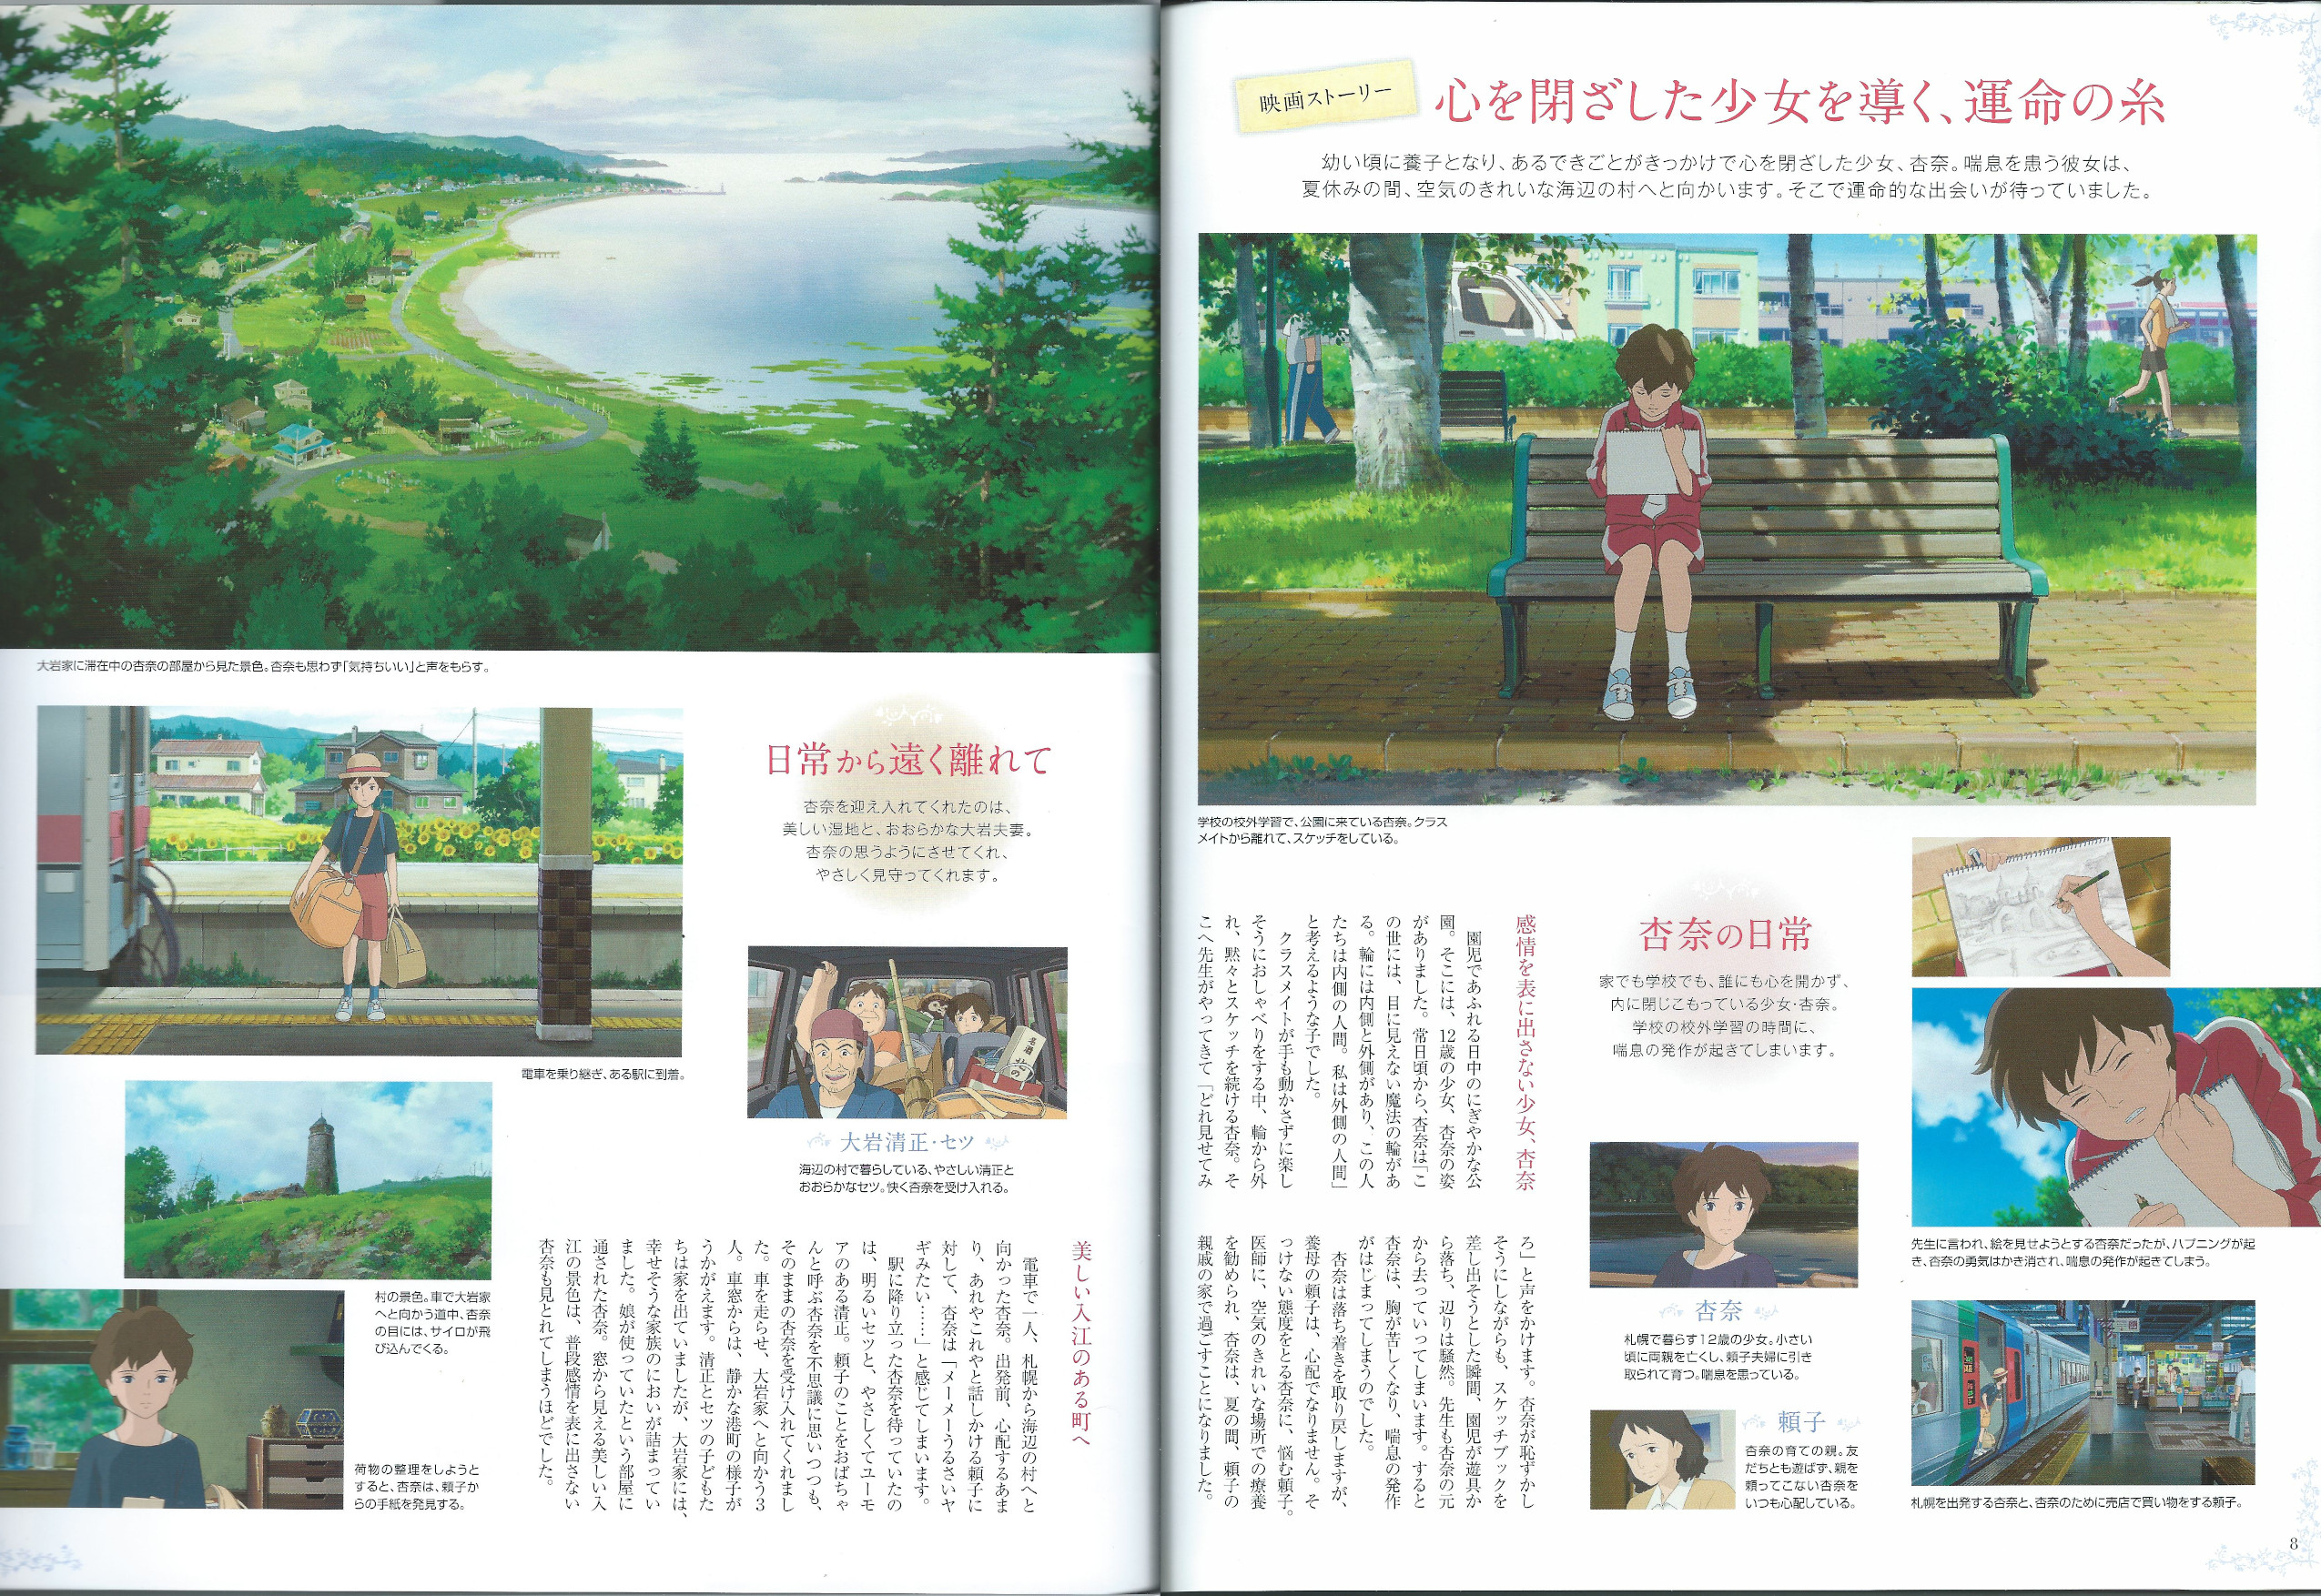 Pages 8 and 9 of the magazine